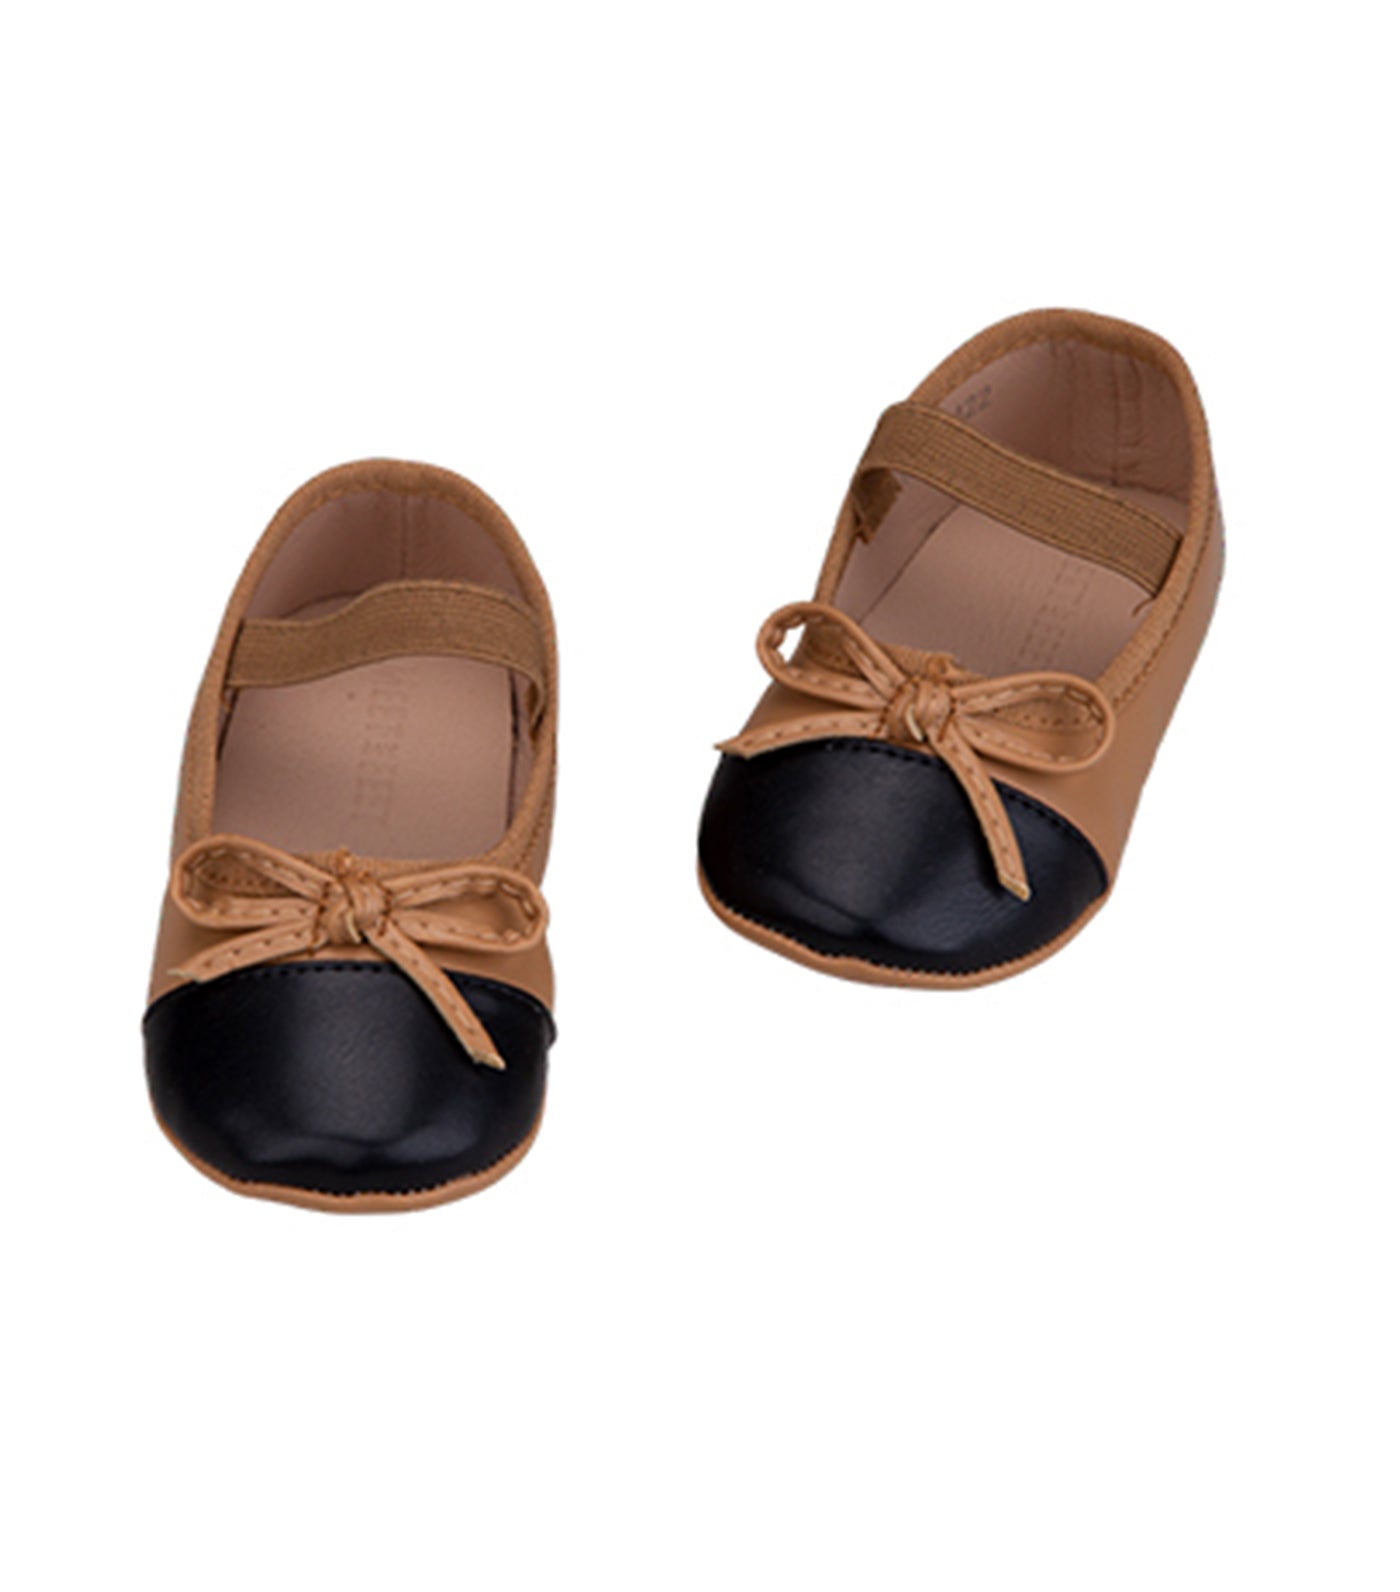 Tai Mary Janes for Toddlers and Kids - Tan and Black